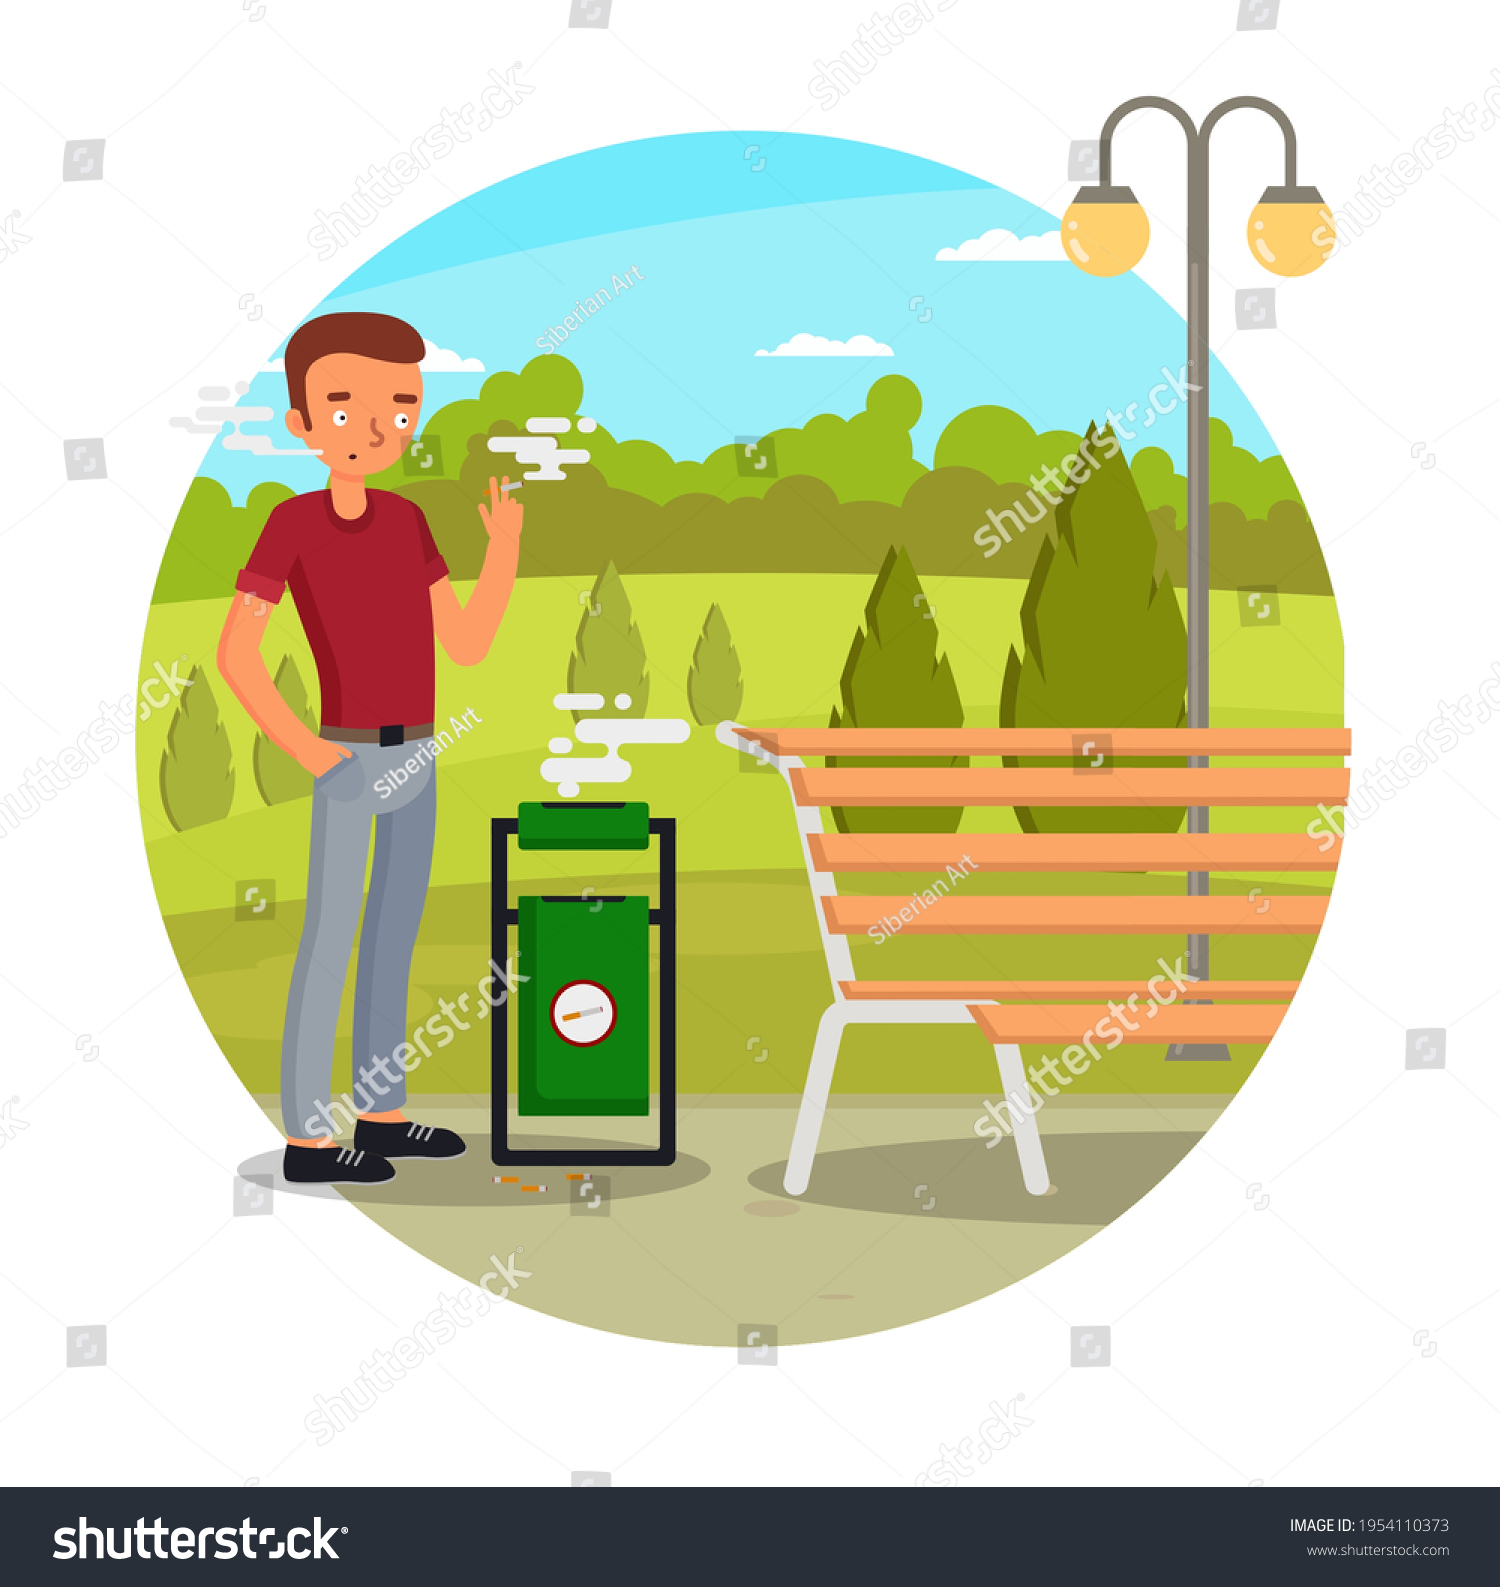 SVG of Addicted to nicotine young man smoking cigarette in city park, flat vector illustration. Passive smoker. Nicotine dependence and abuse, tobacco and smoking addiction. svg